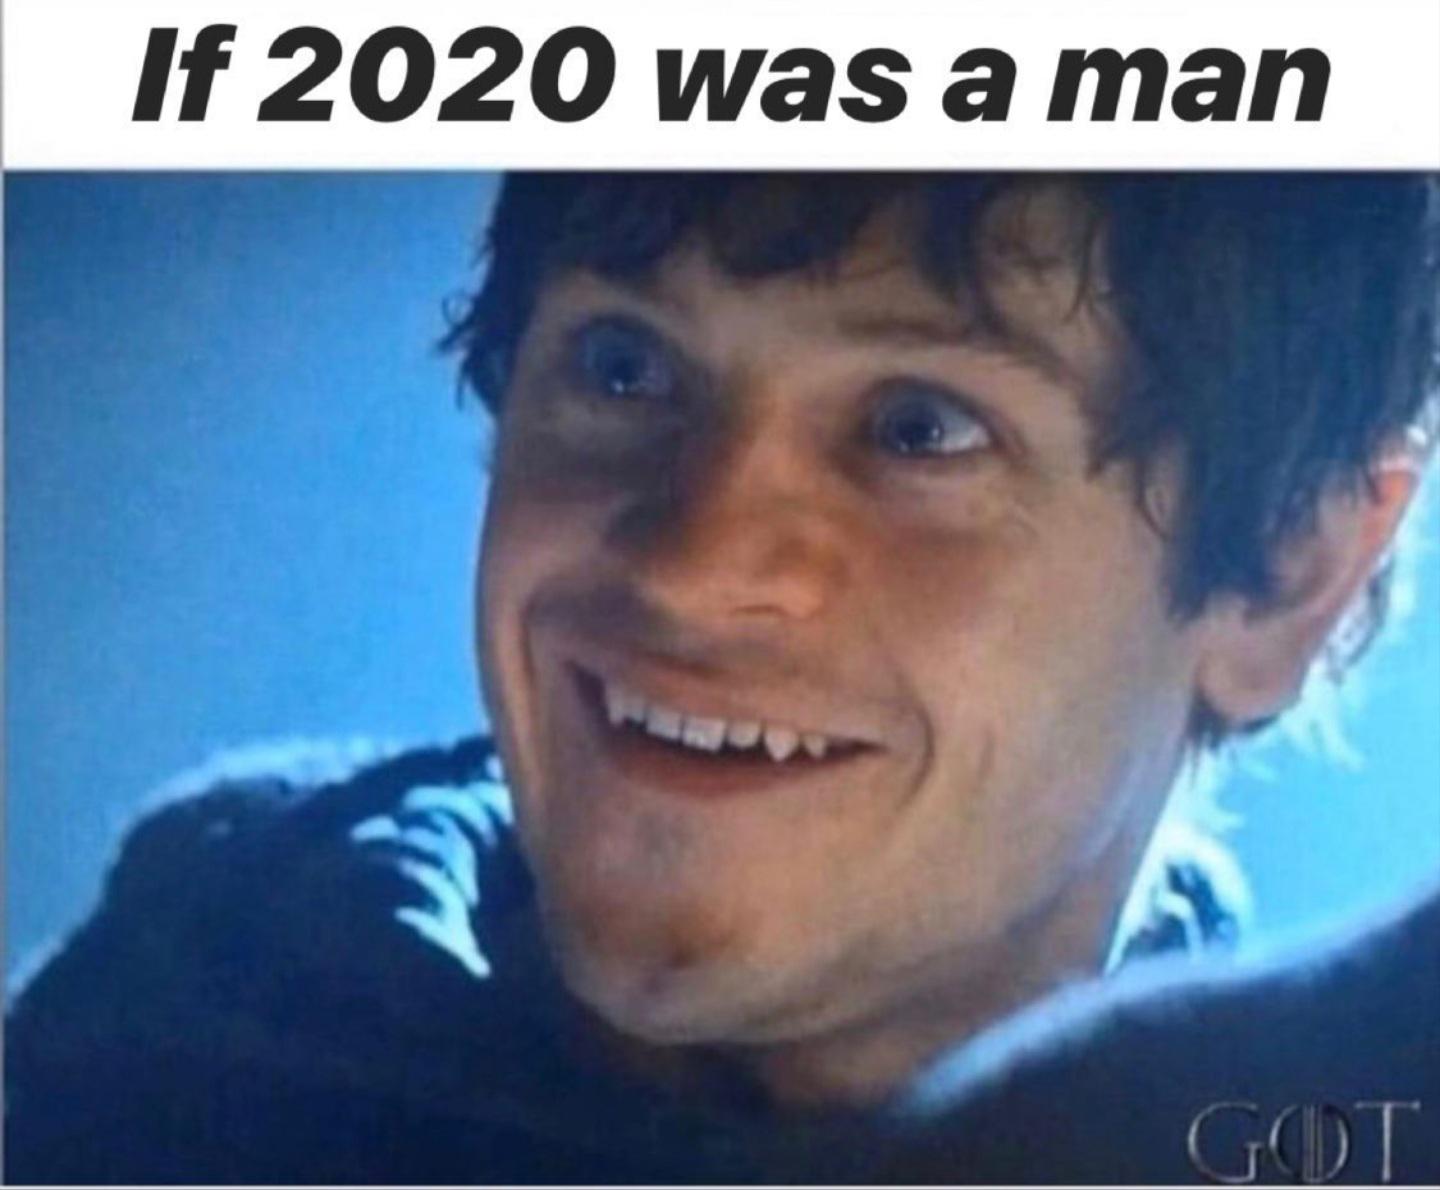 Game of thrones, Ramsey, Ramsay, Theon, North, Lord Game of thrones memes Game of thrones, Ramsey, Ramsay, Theon, North, Lord text: If 2020 was a man 